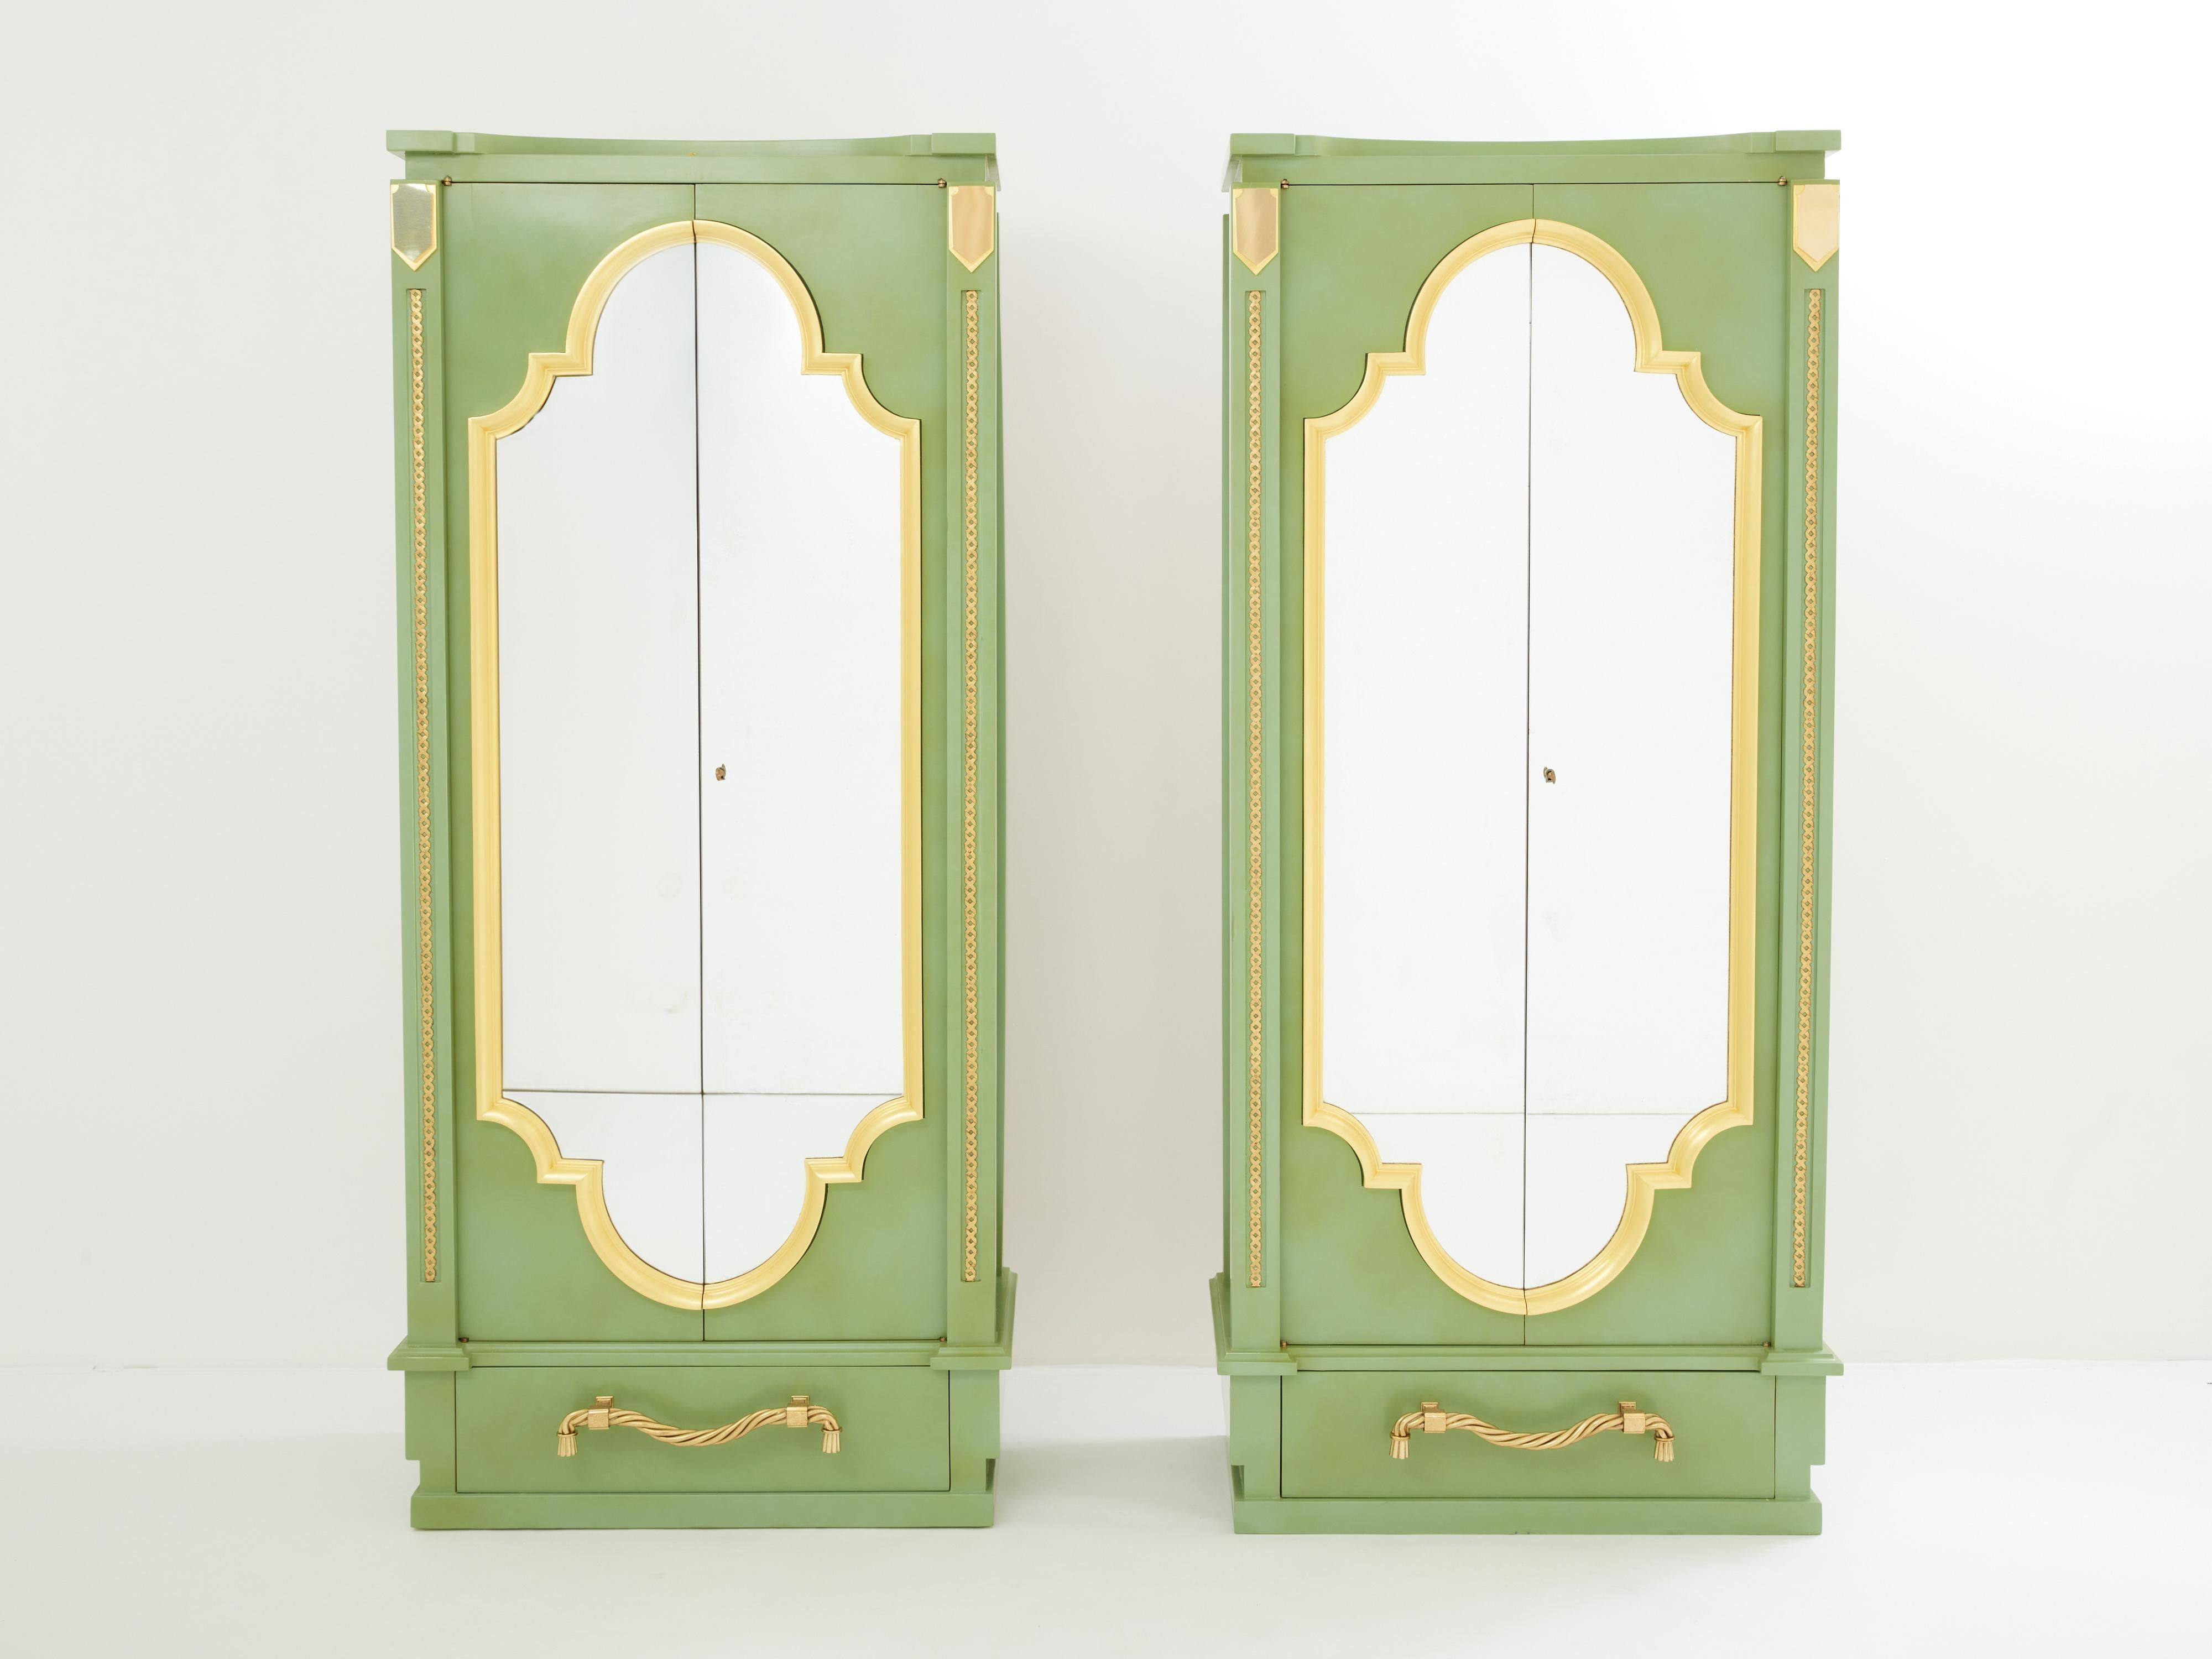 This unique pair of André Arbus wardrobes is sure to add an element of French neoclassicism chic to any room. It was designed by André Arbus in the late 1930s. Made out of solid oak wood, each wardrobe is decorated with André Arbus celadon green